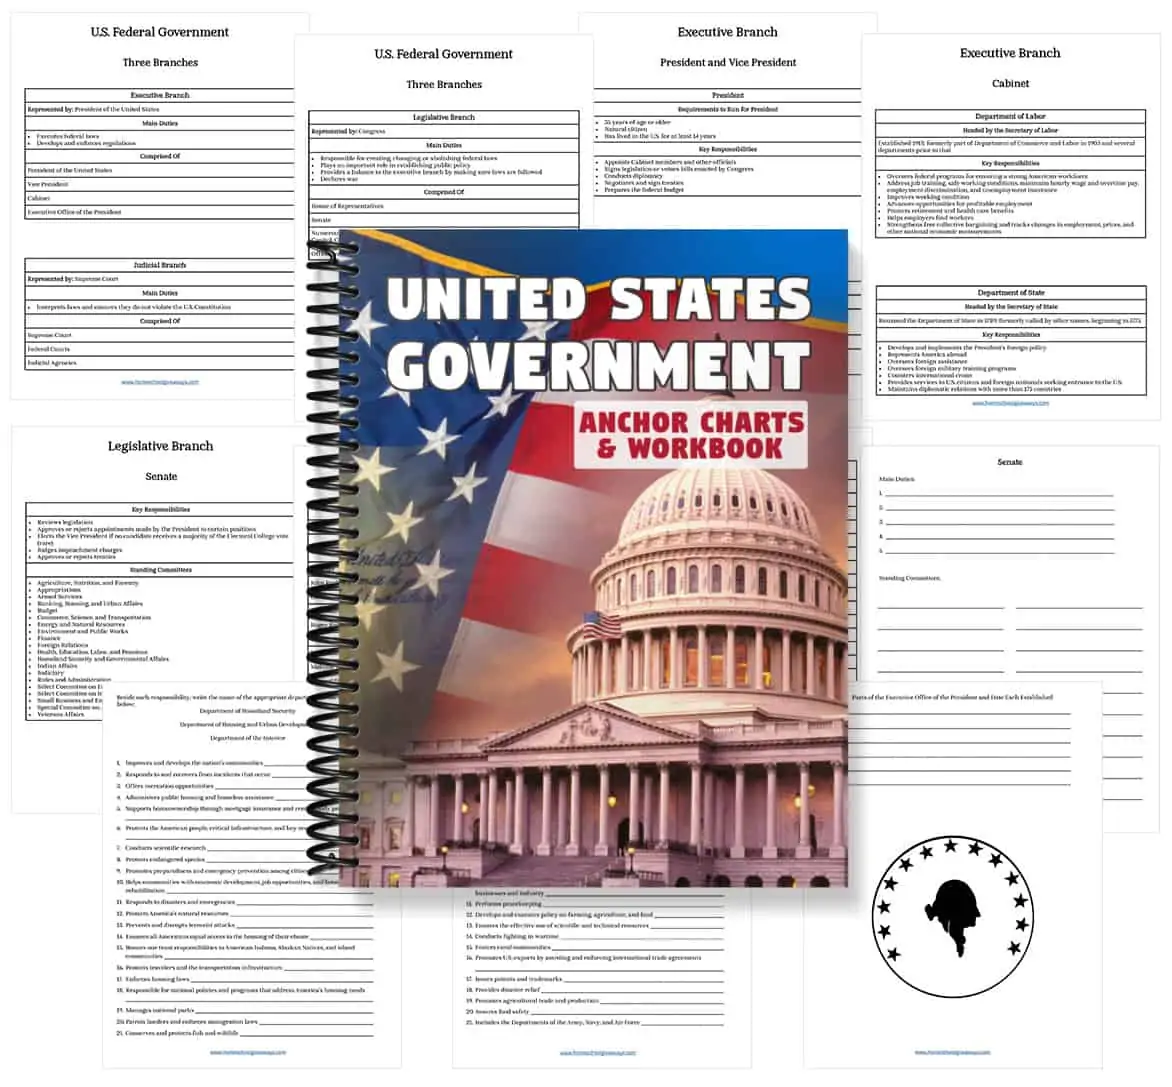 United States Government workbook cover with background image examples of pages from the workbook